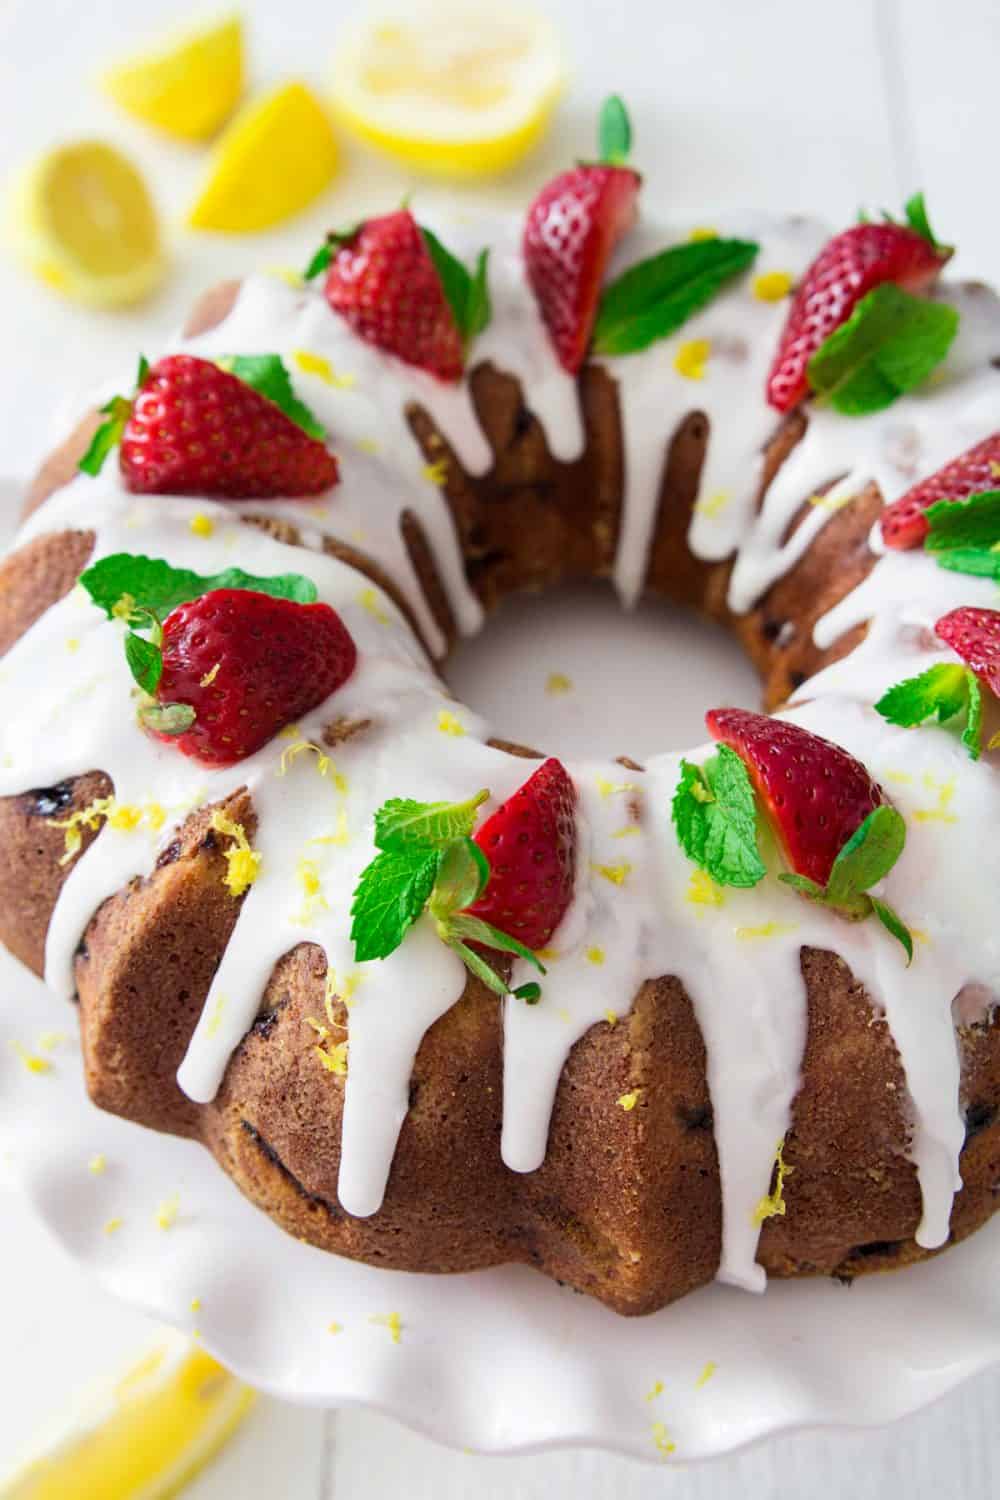 Strawberry Bundt Cake Recipe - Simply Home Cooked